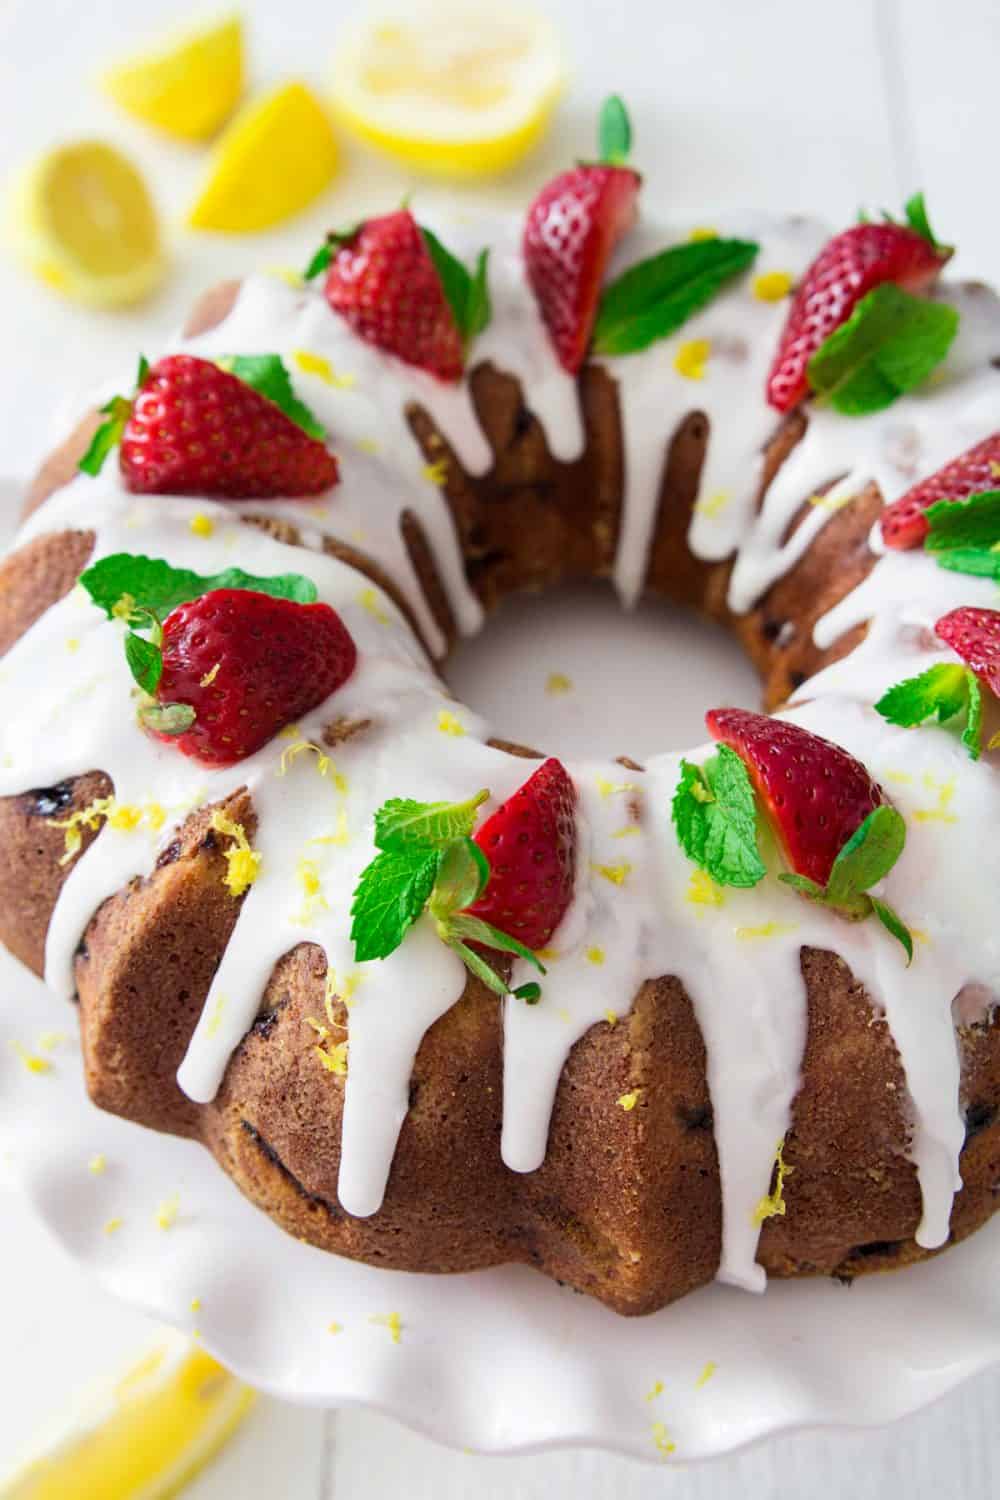 Strawberry Bundt Cake Recipe - Simply Home Cooked